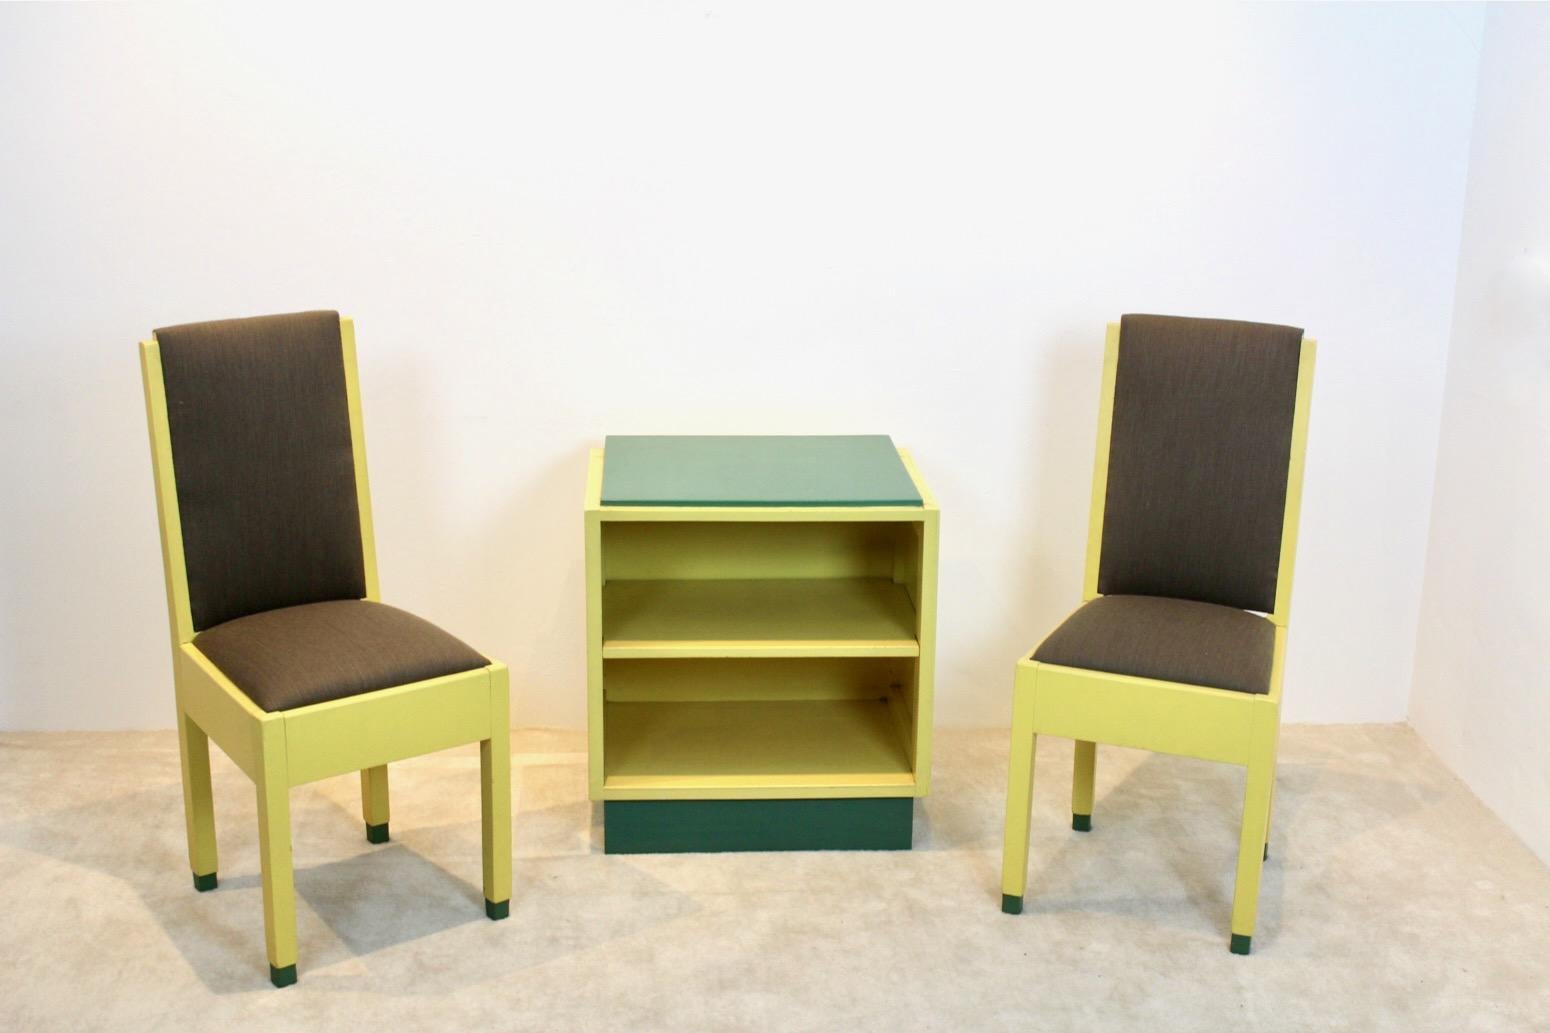 Important pair of Chairs and small Cabinet designed and manufactured during Jan den Drijver’s formative years in The Hague when he established ‘Woningrichting De Stijl’, a showroom and workshop which lasted for only three years between 1933-36. The